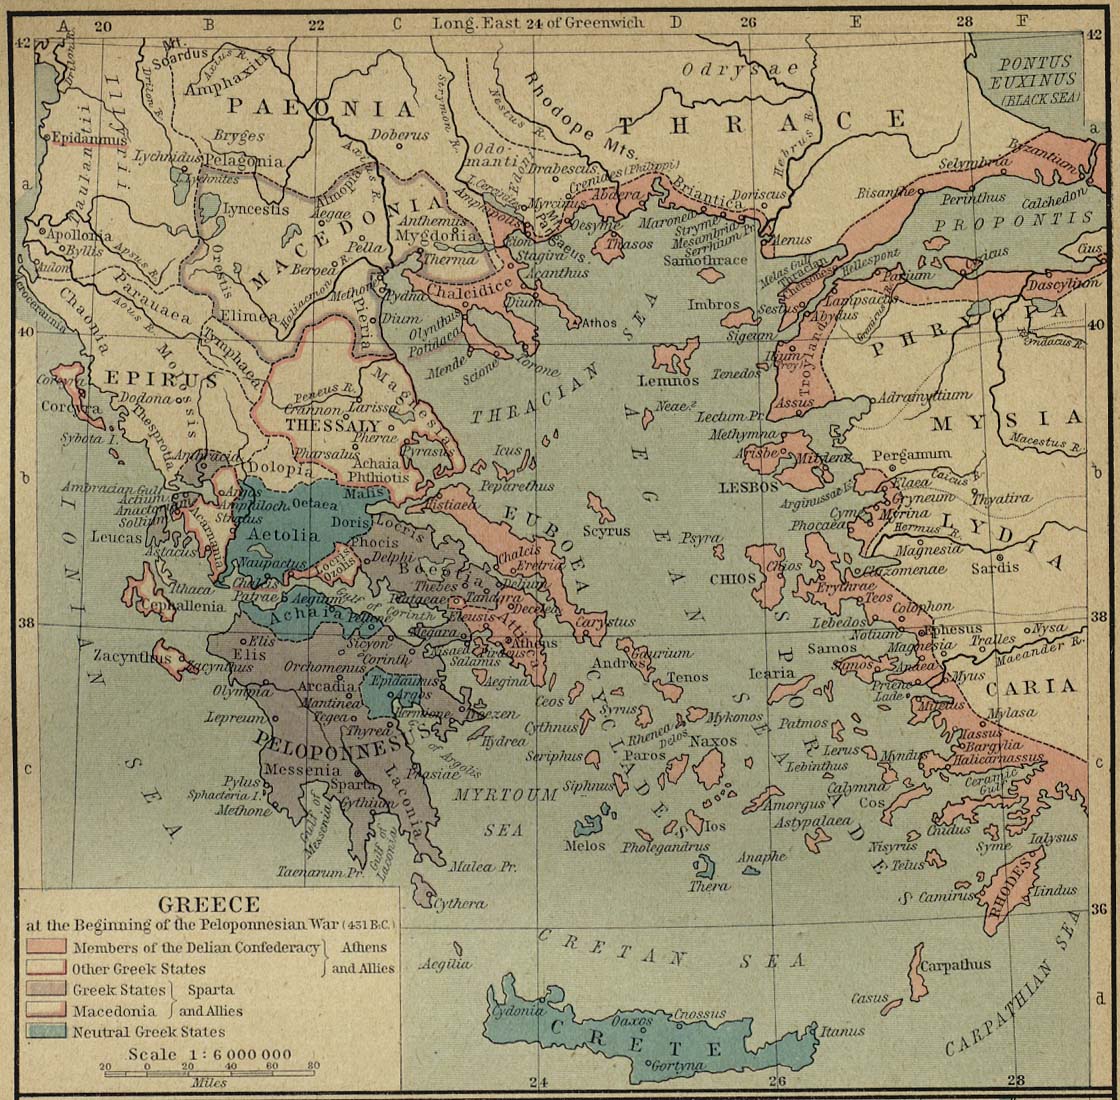 Map of Greece at the Beginning of the Peloponnesian War (431 B.C.)